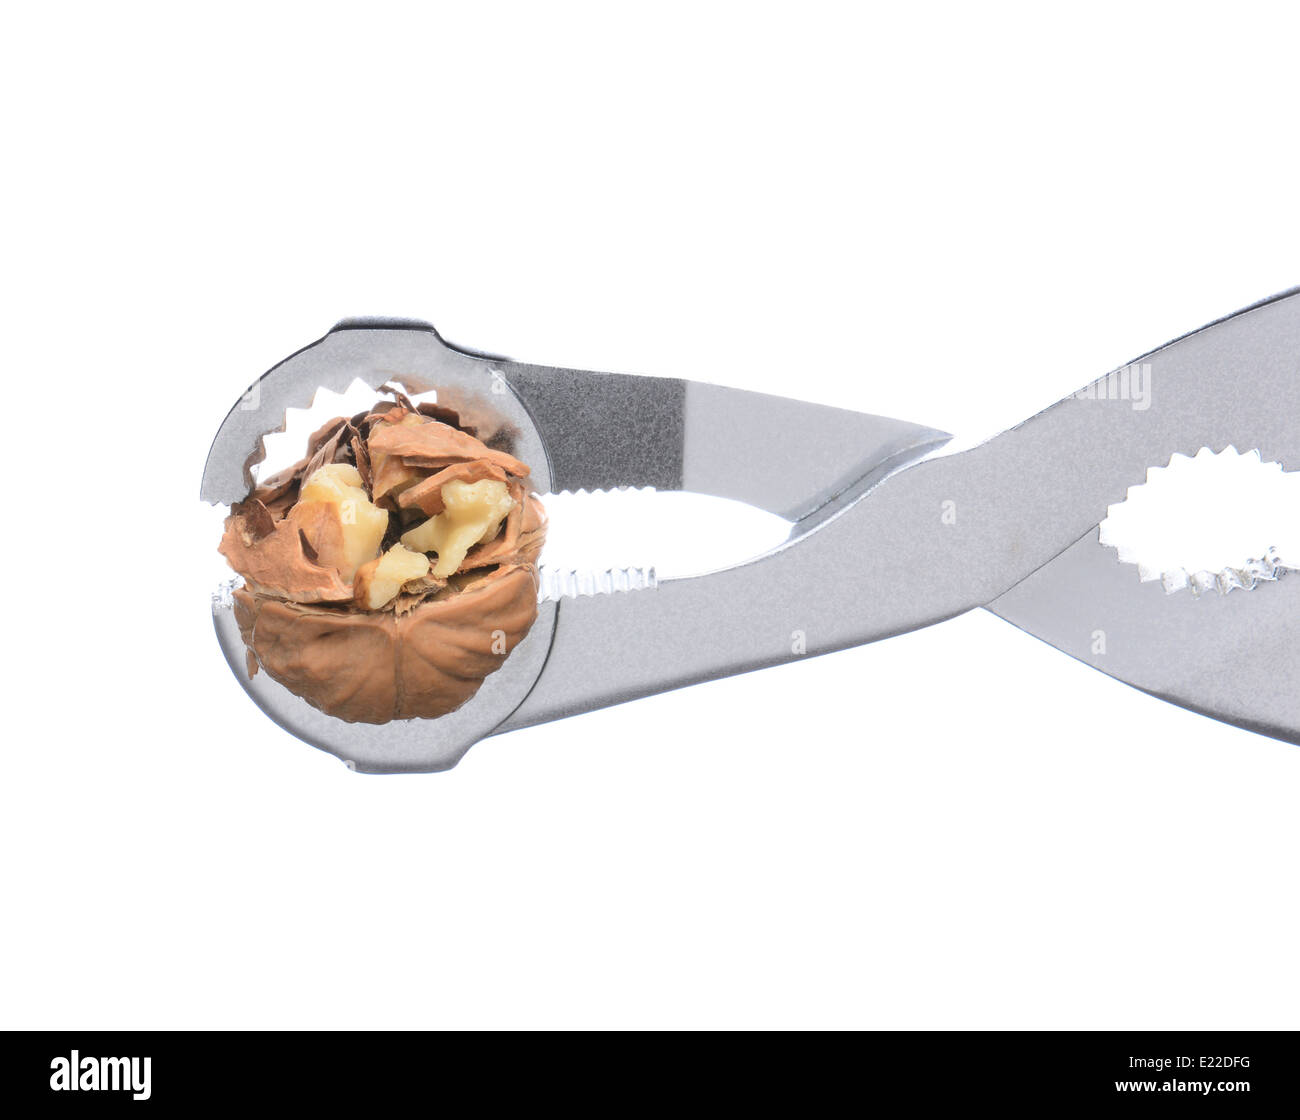 Closeup of a nutcracker with a walnut in its jaws. The nut is partially cracked. Horizontal format over a white background. Stock Photo